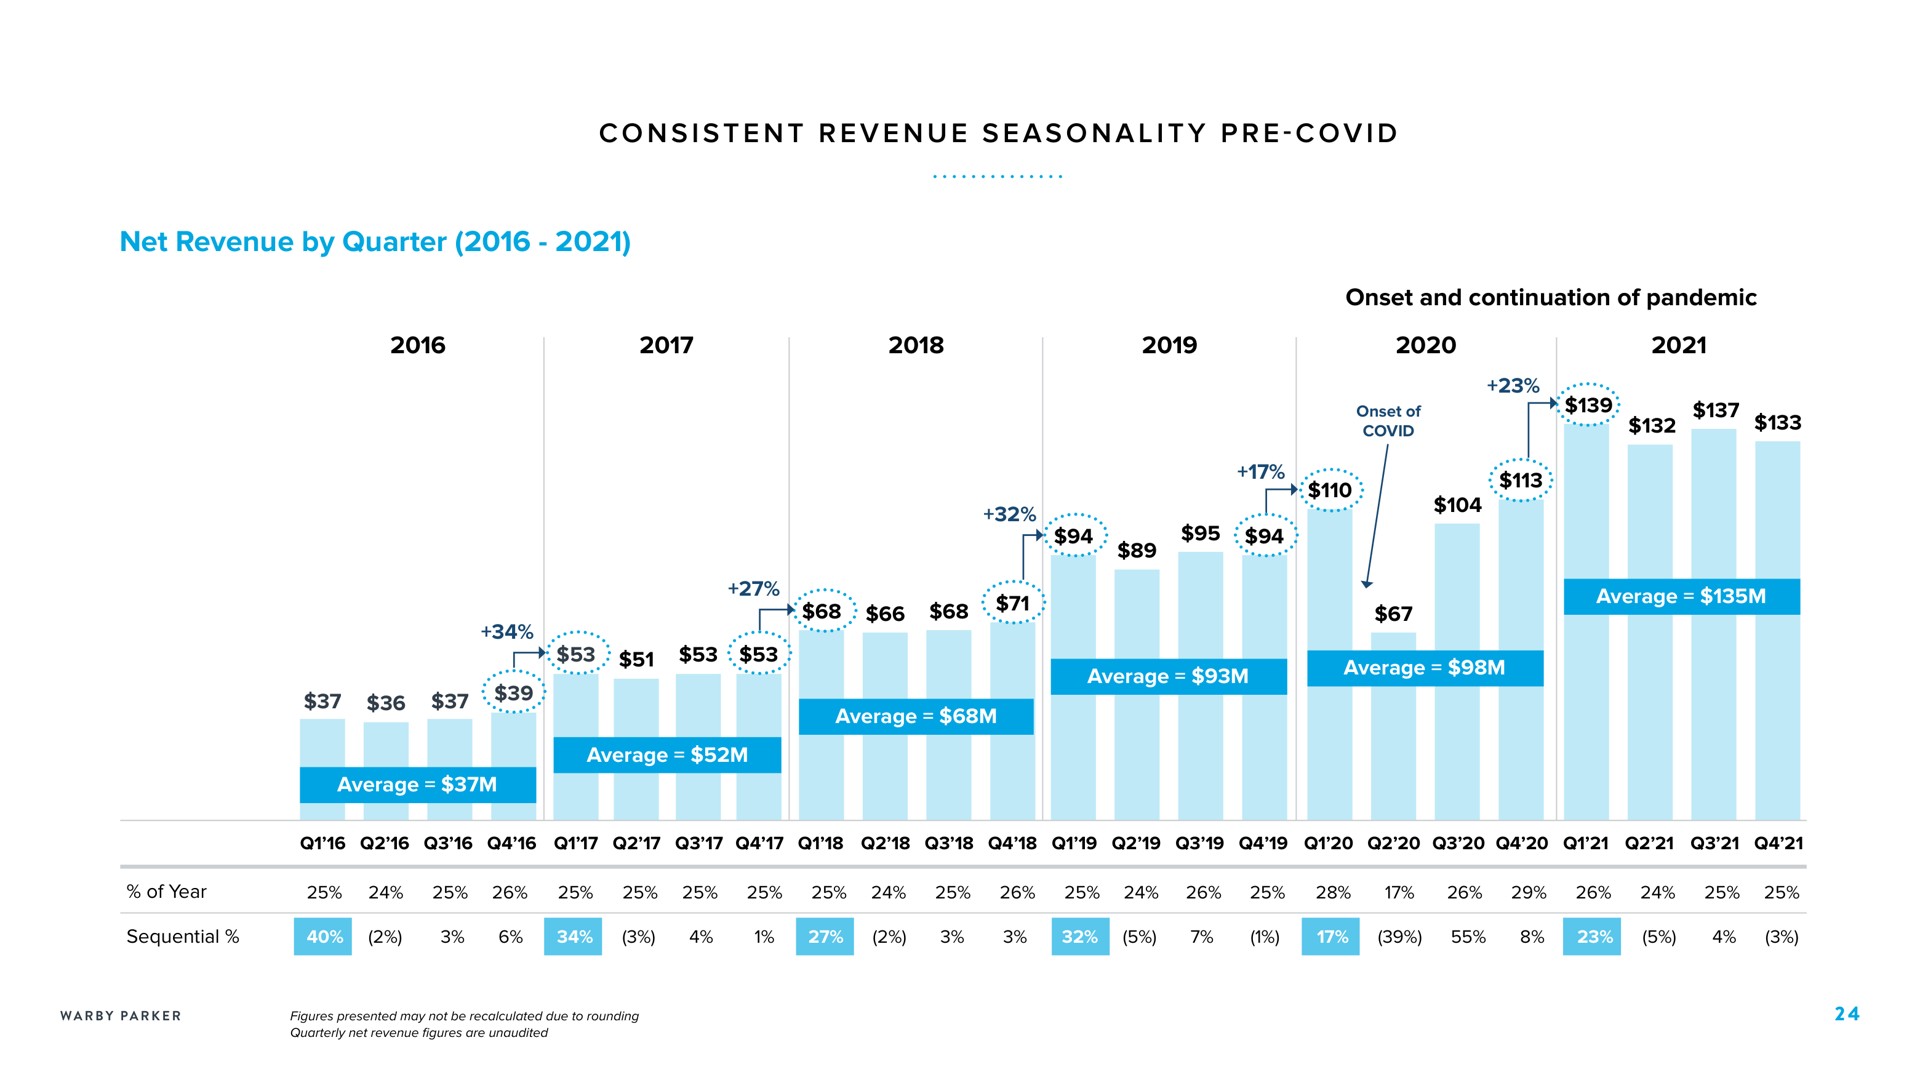 i a a i i net revenue by quarter onset and continuation of pandemic consistent seasonality covid lieu seam soh fey | Warby Parker